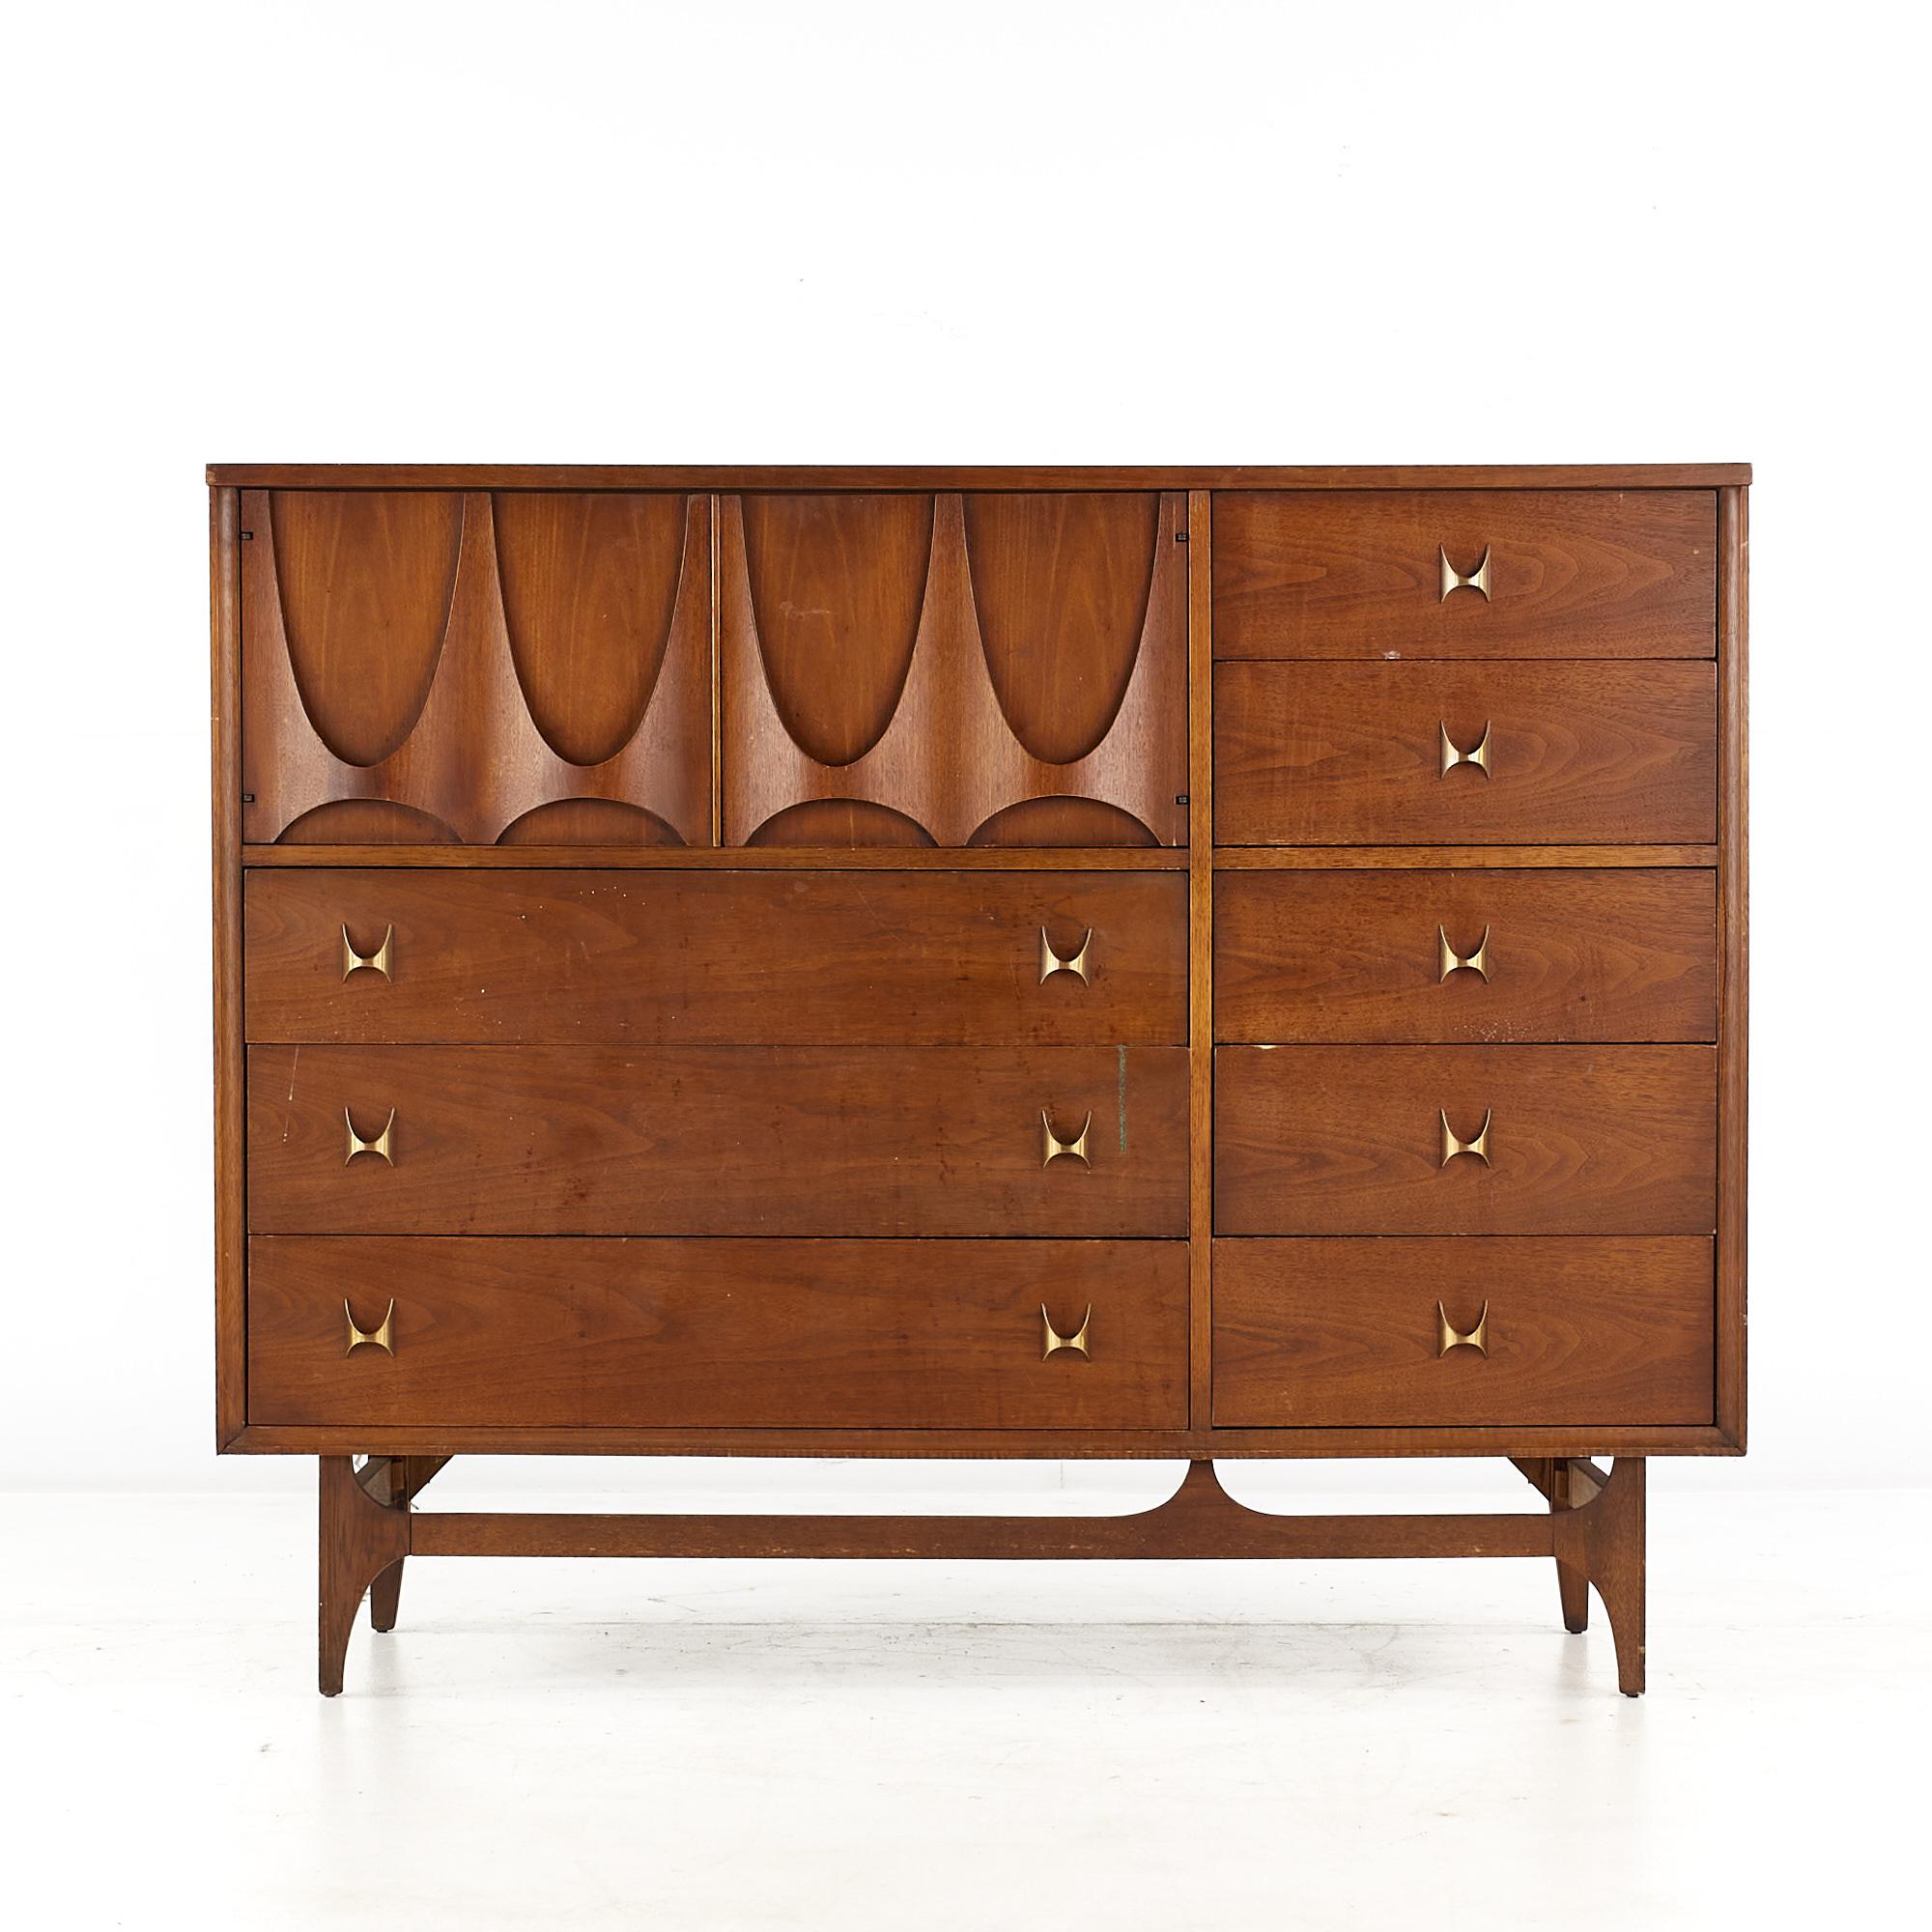 Broyhill Brasilia Mid Century Walnut Magna Dresser.

This dresser measures: 54 wide x 19 deep x 43.5 inches high.

All pieces of furniture can be had in what we call restored vintage condition. That means the piece is restored upon purchase so